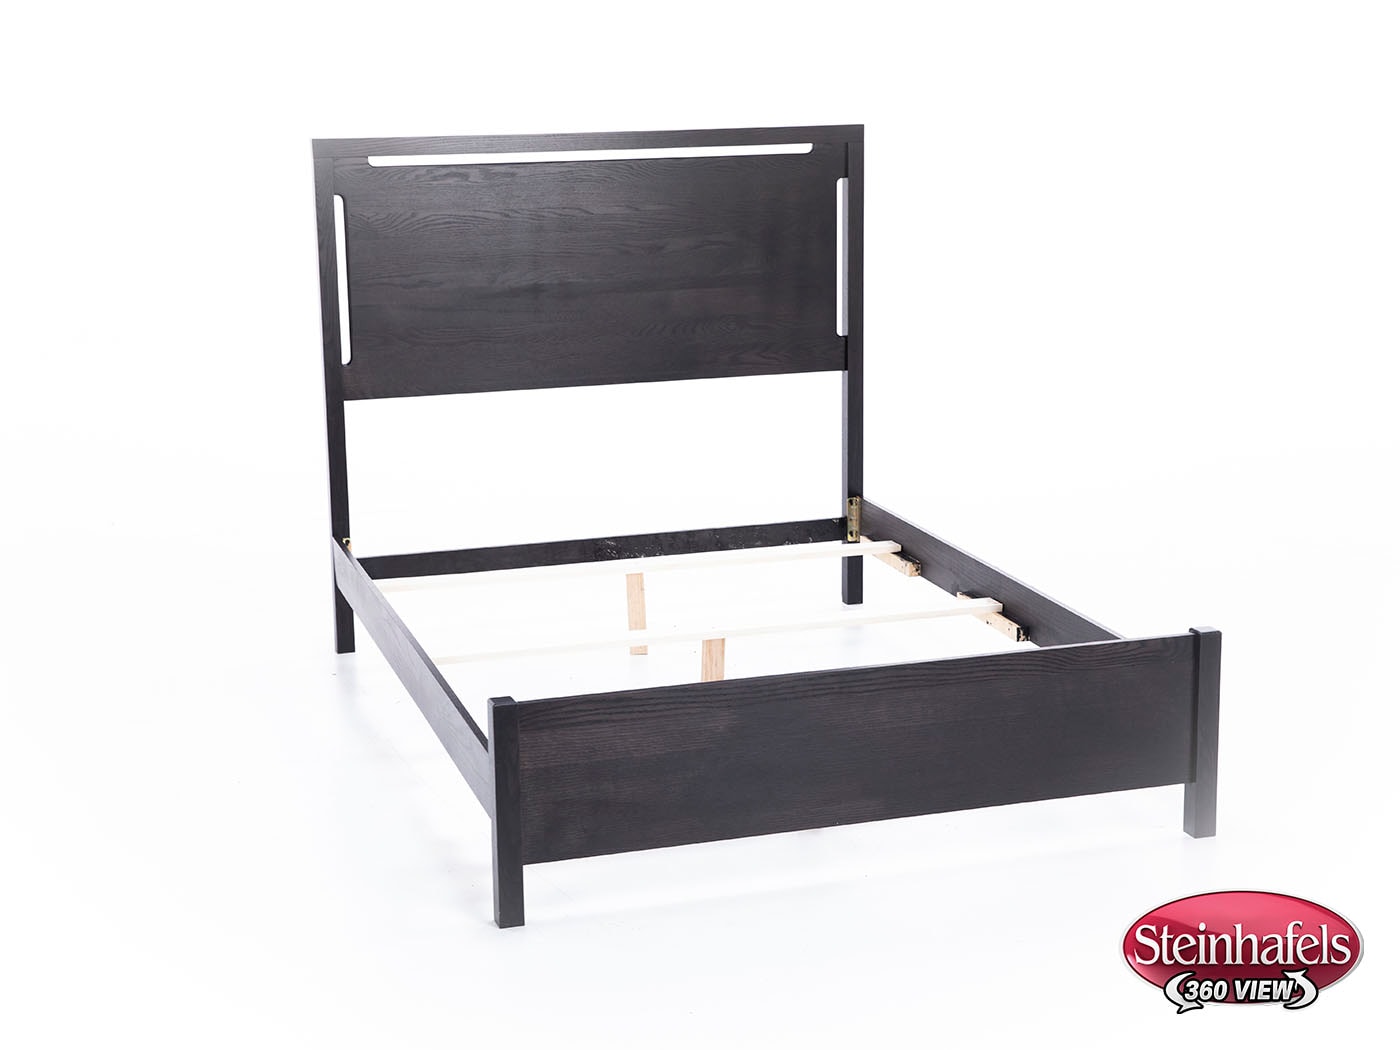 witmer furniture black queen bed package  image qpk  